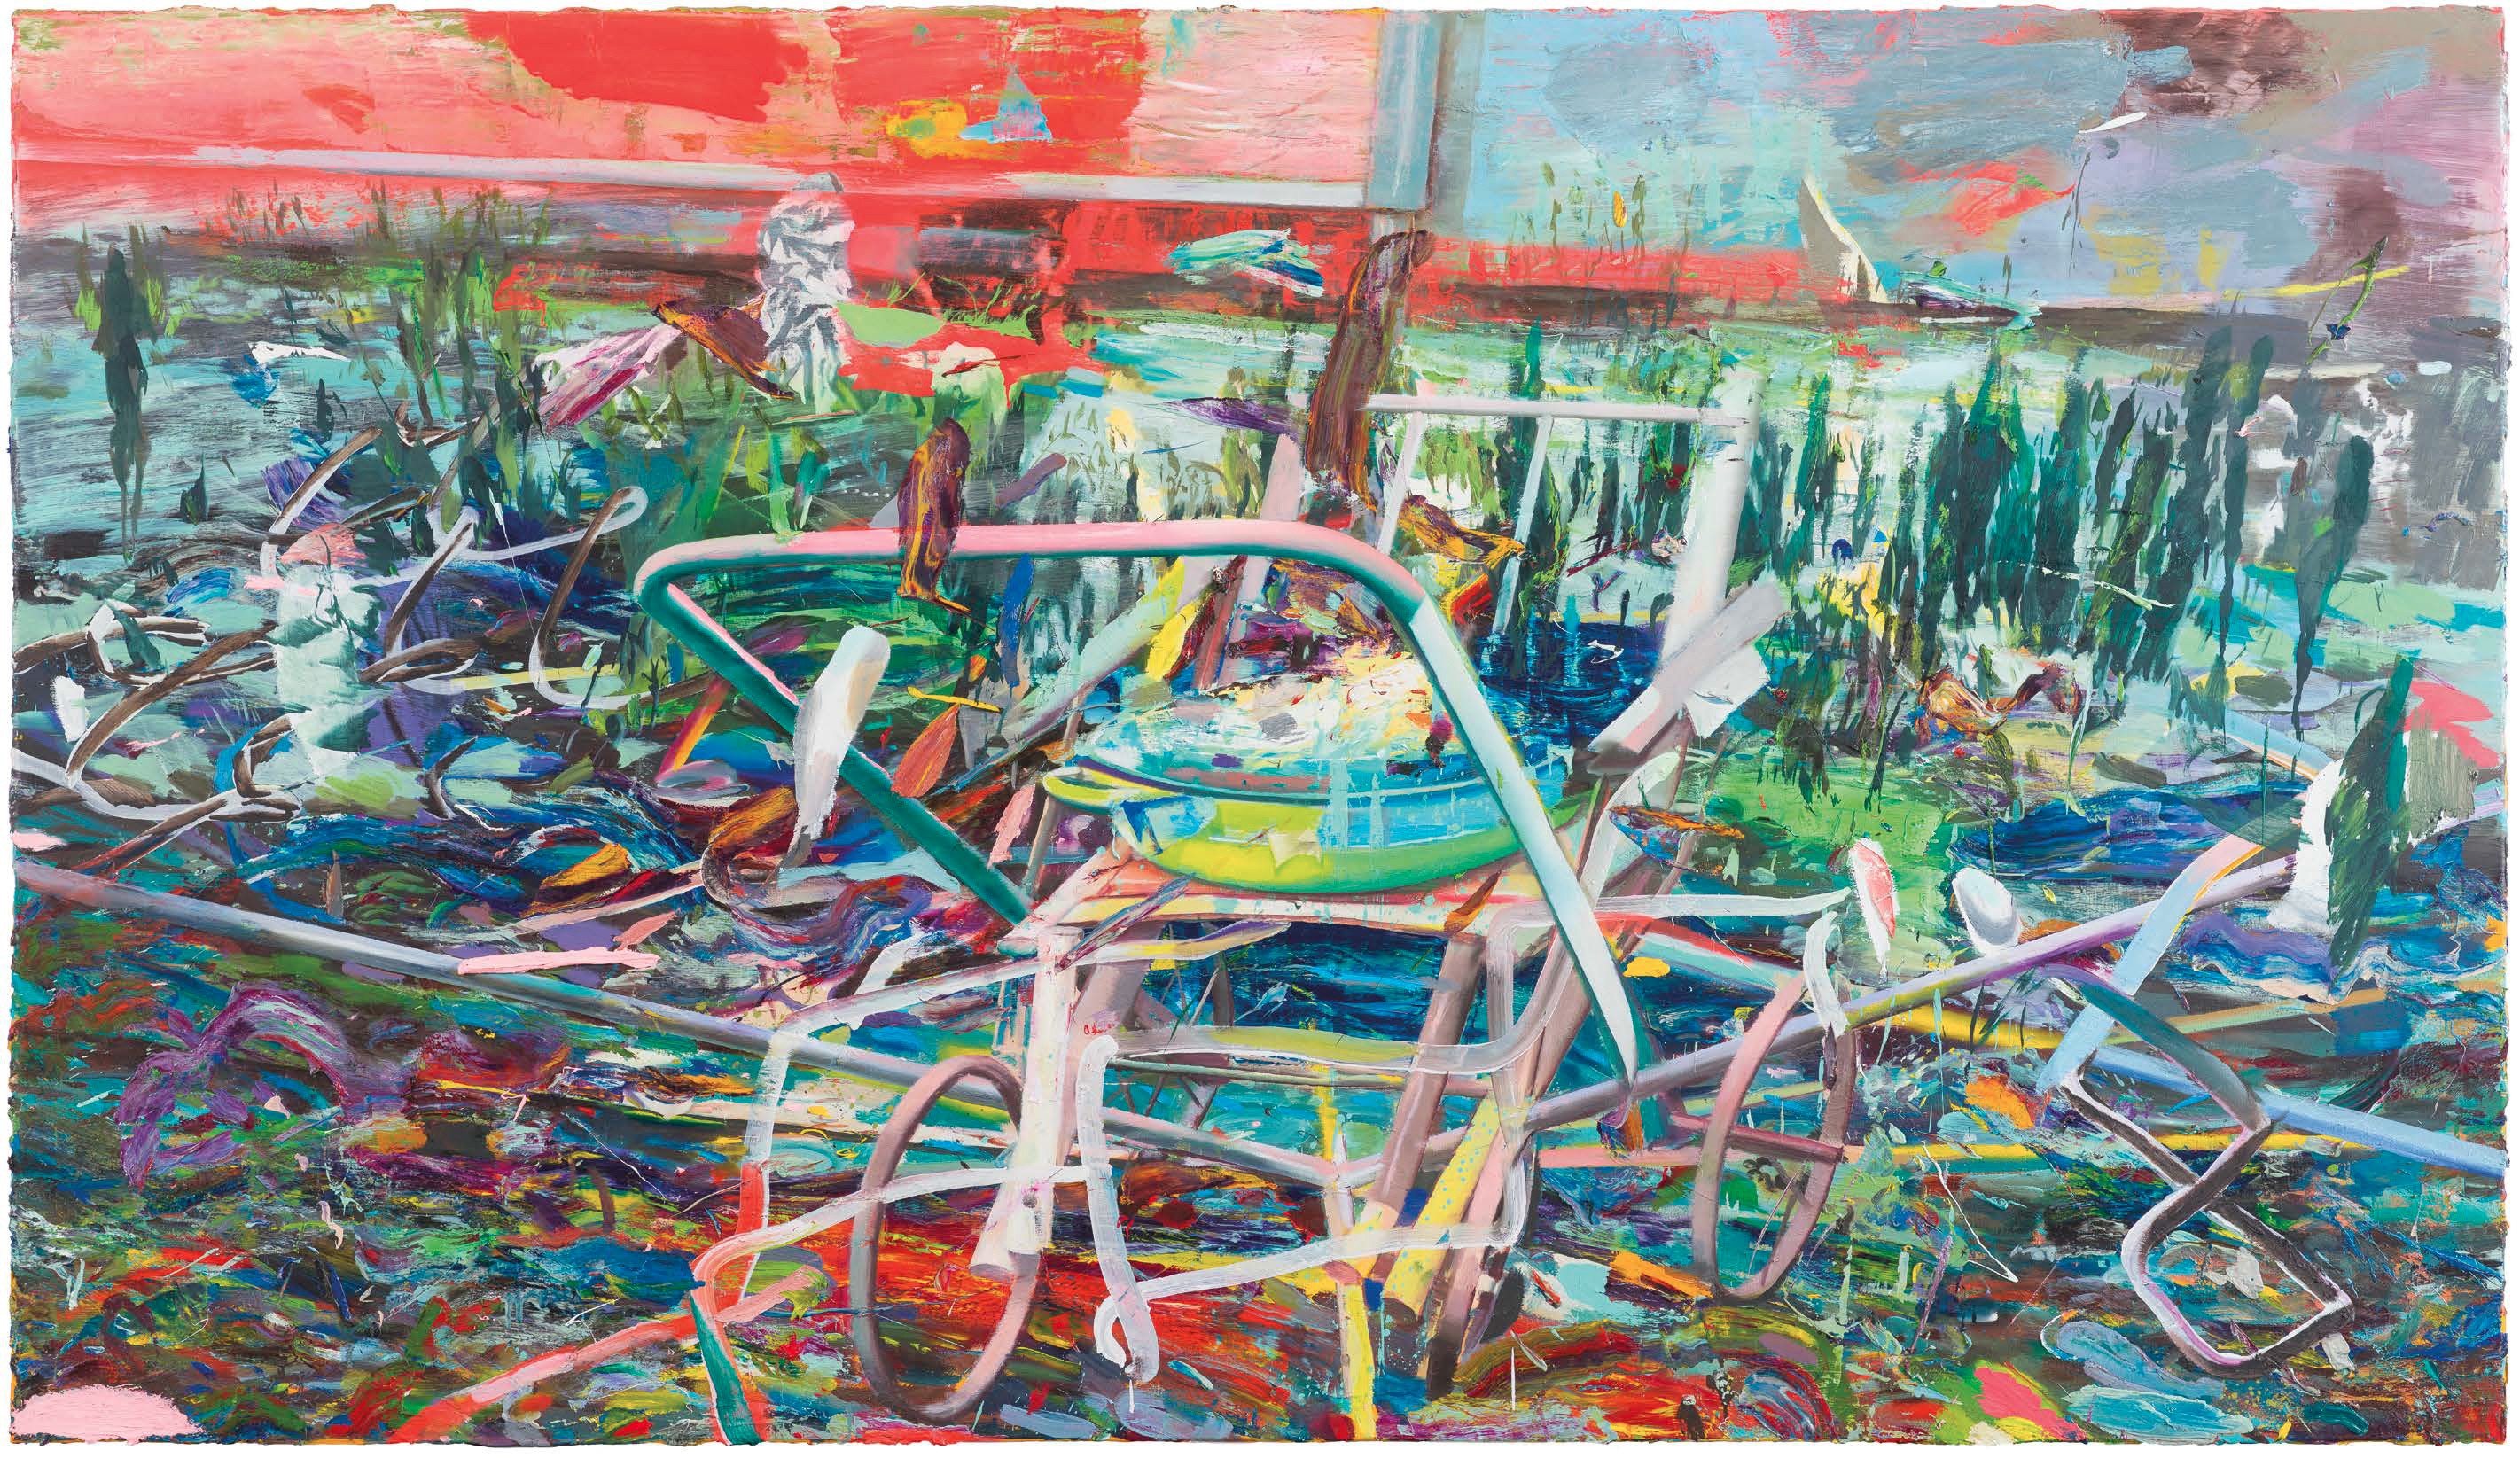 LYING OUT 2015 - 2016 OIL ON CANVAS 133 x 220 cm